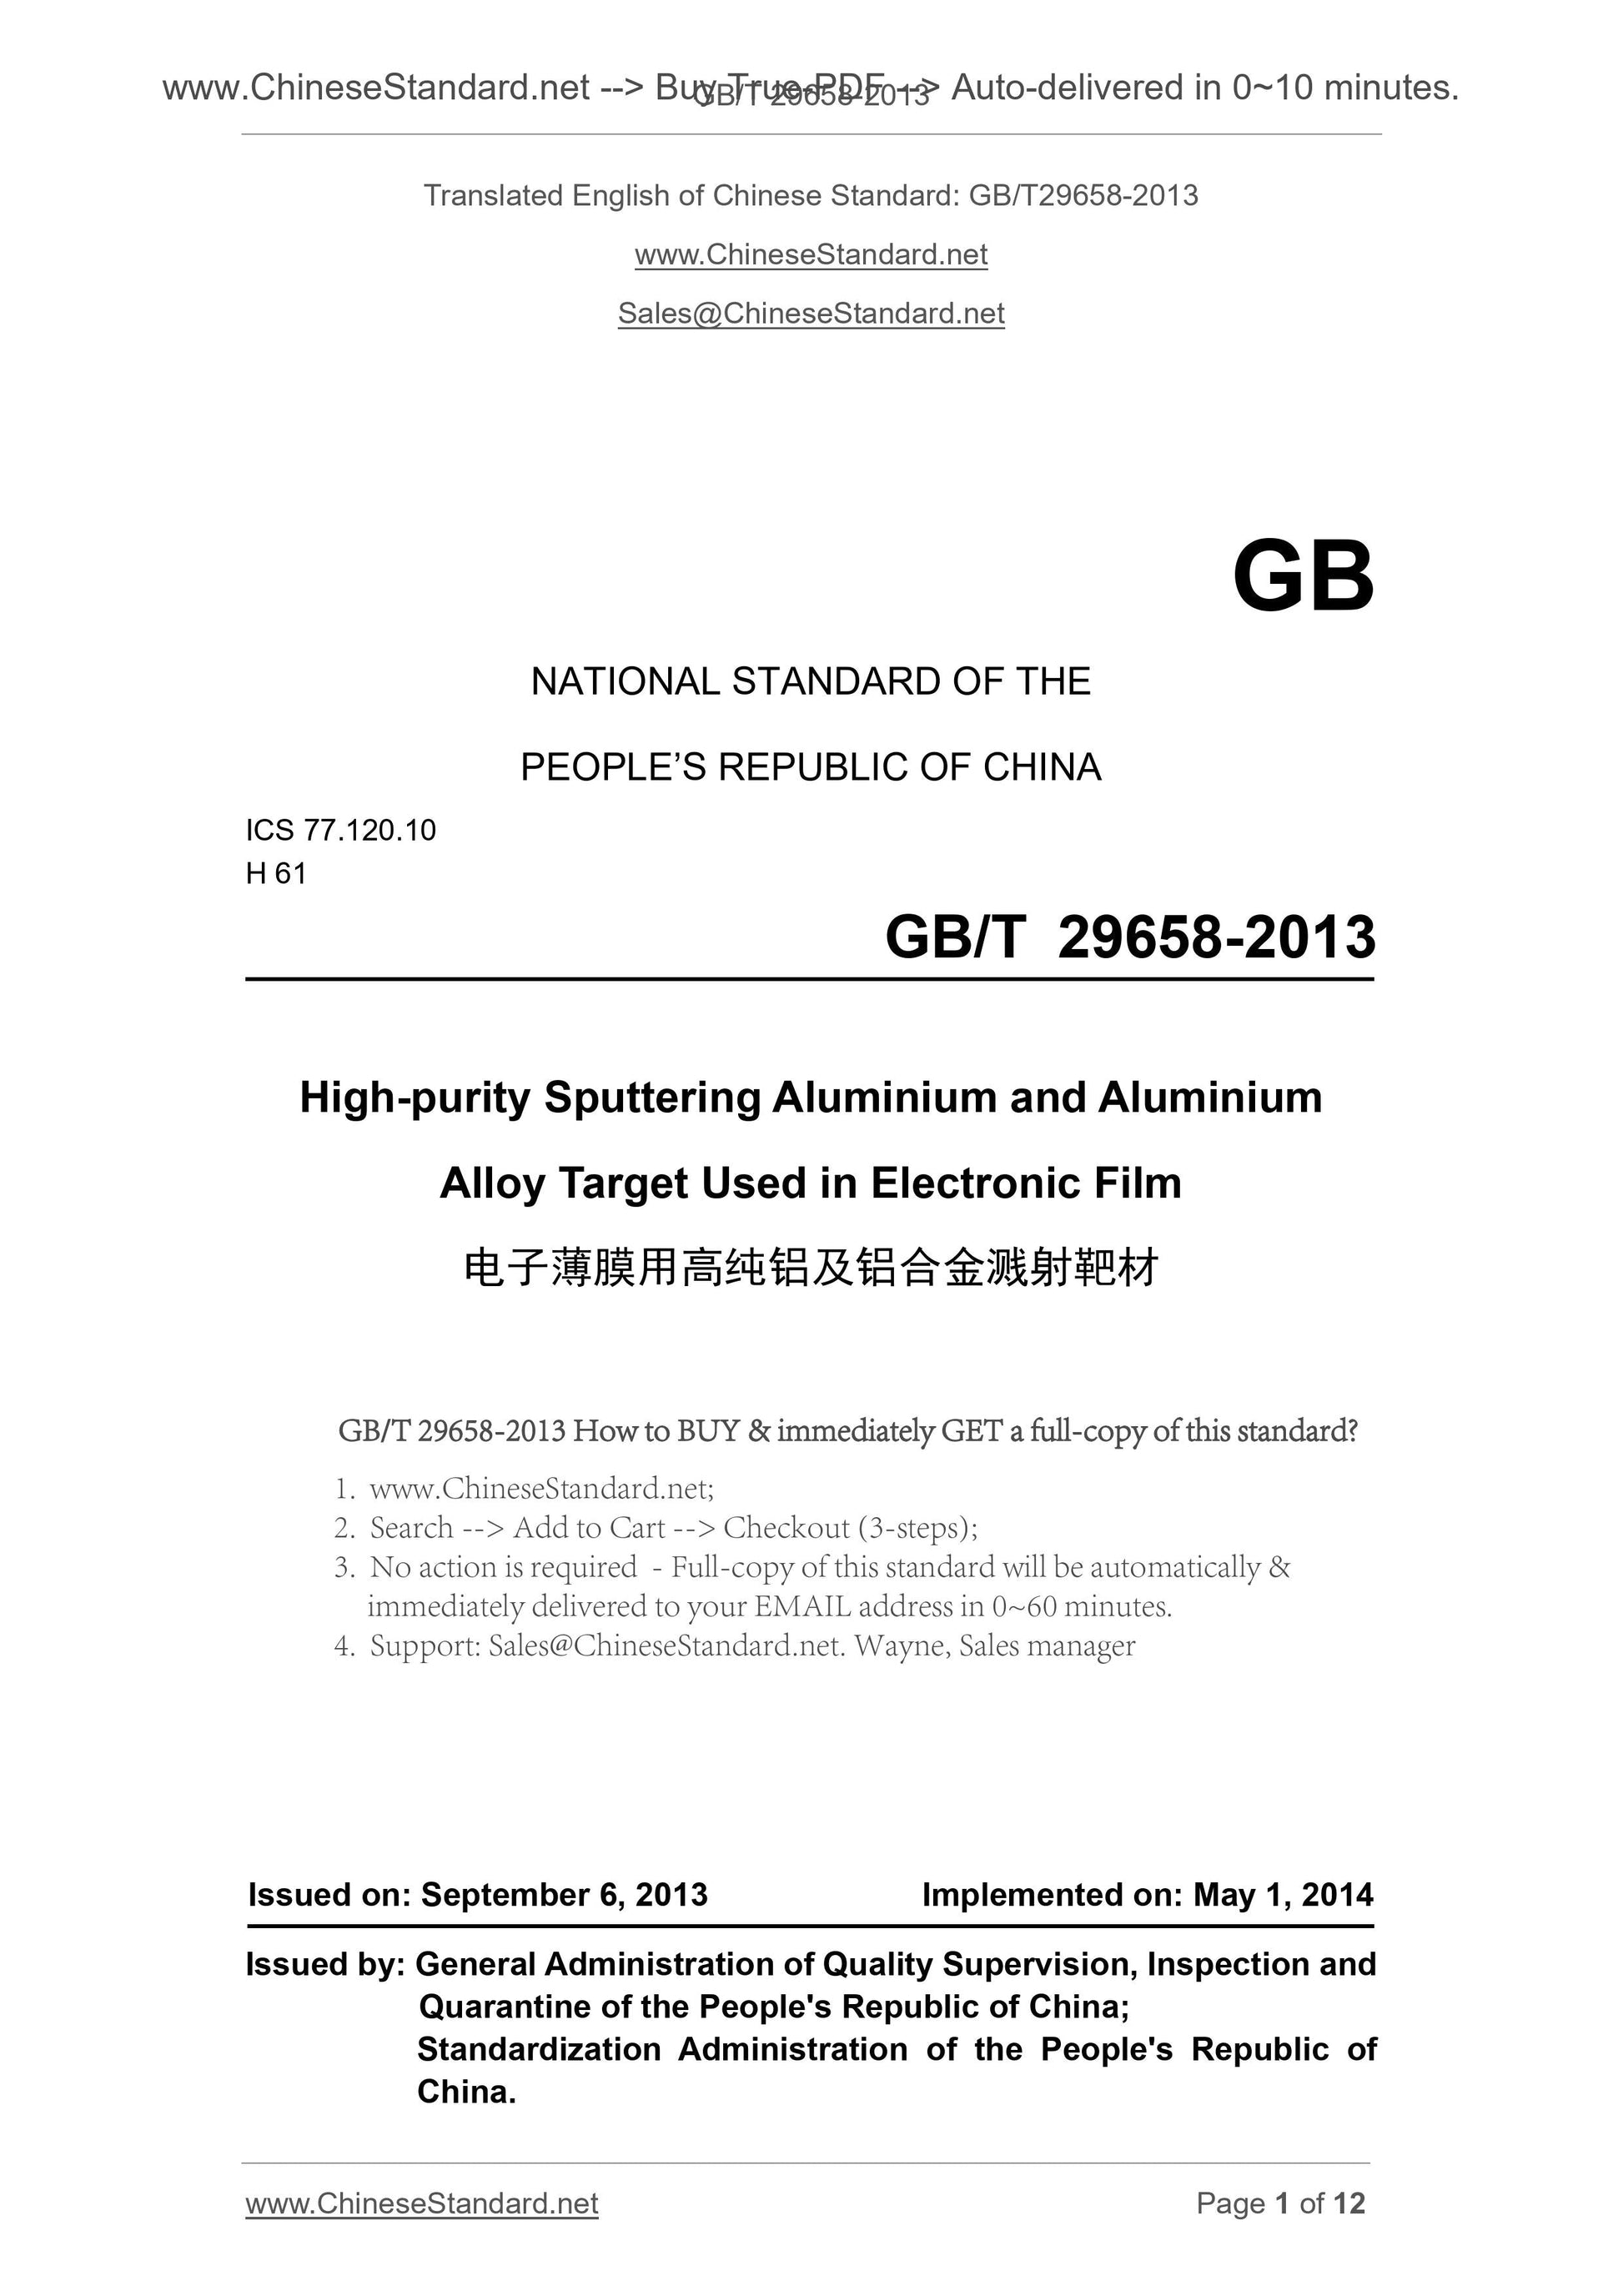 GB/T 29658-2013 Page 1